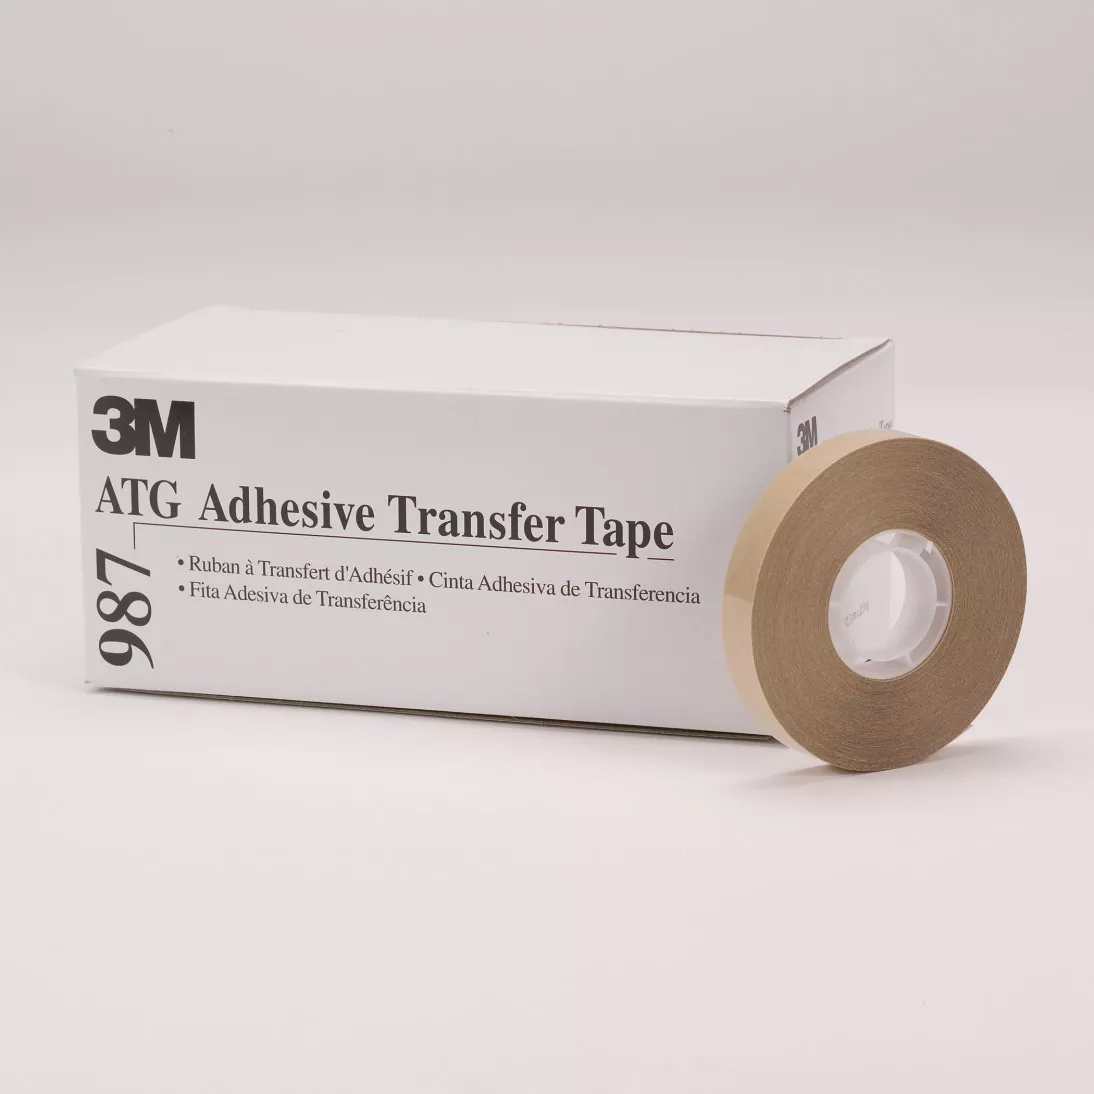 3M™ ATG Adhesive Transfer Tape 987, Clear, 1/4 in x 36 yd, 2.0 mil, 72
rolls per case